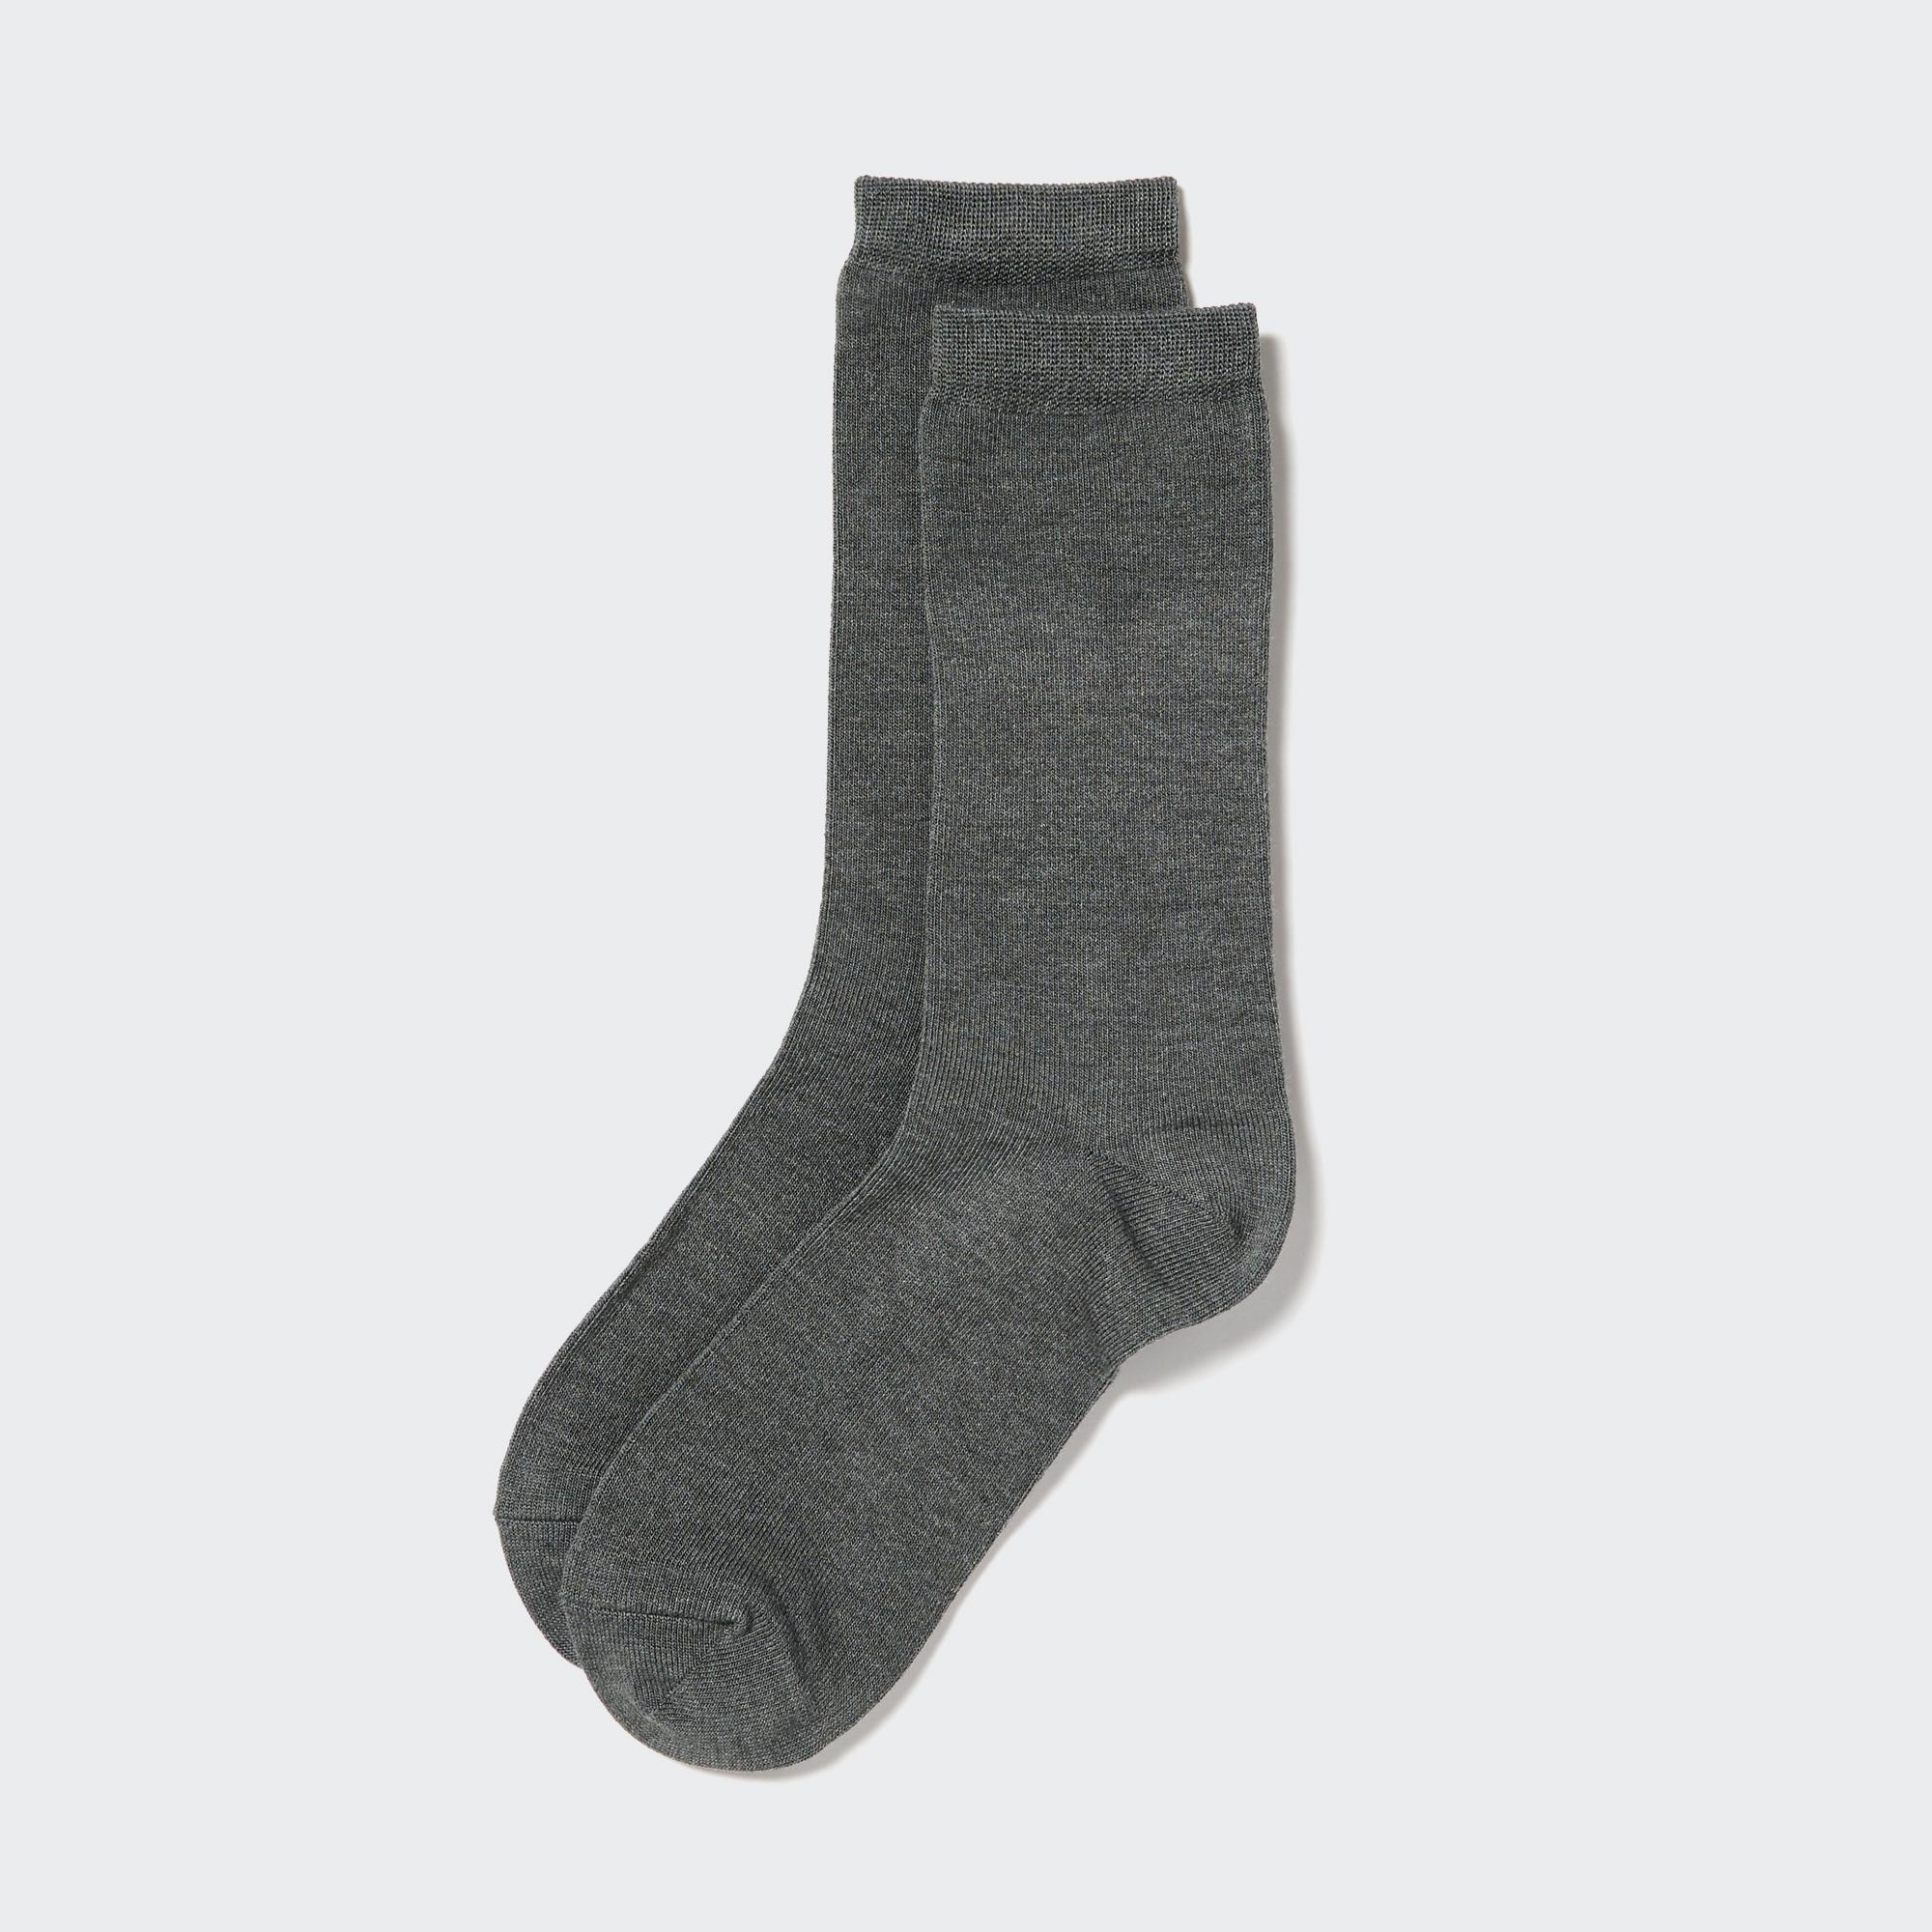 These Comfy Socks Are My Go-To, and They're on Sale at